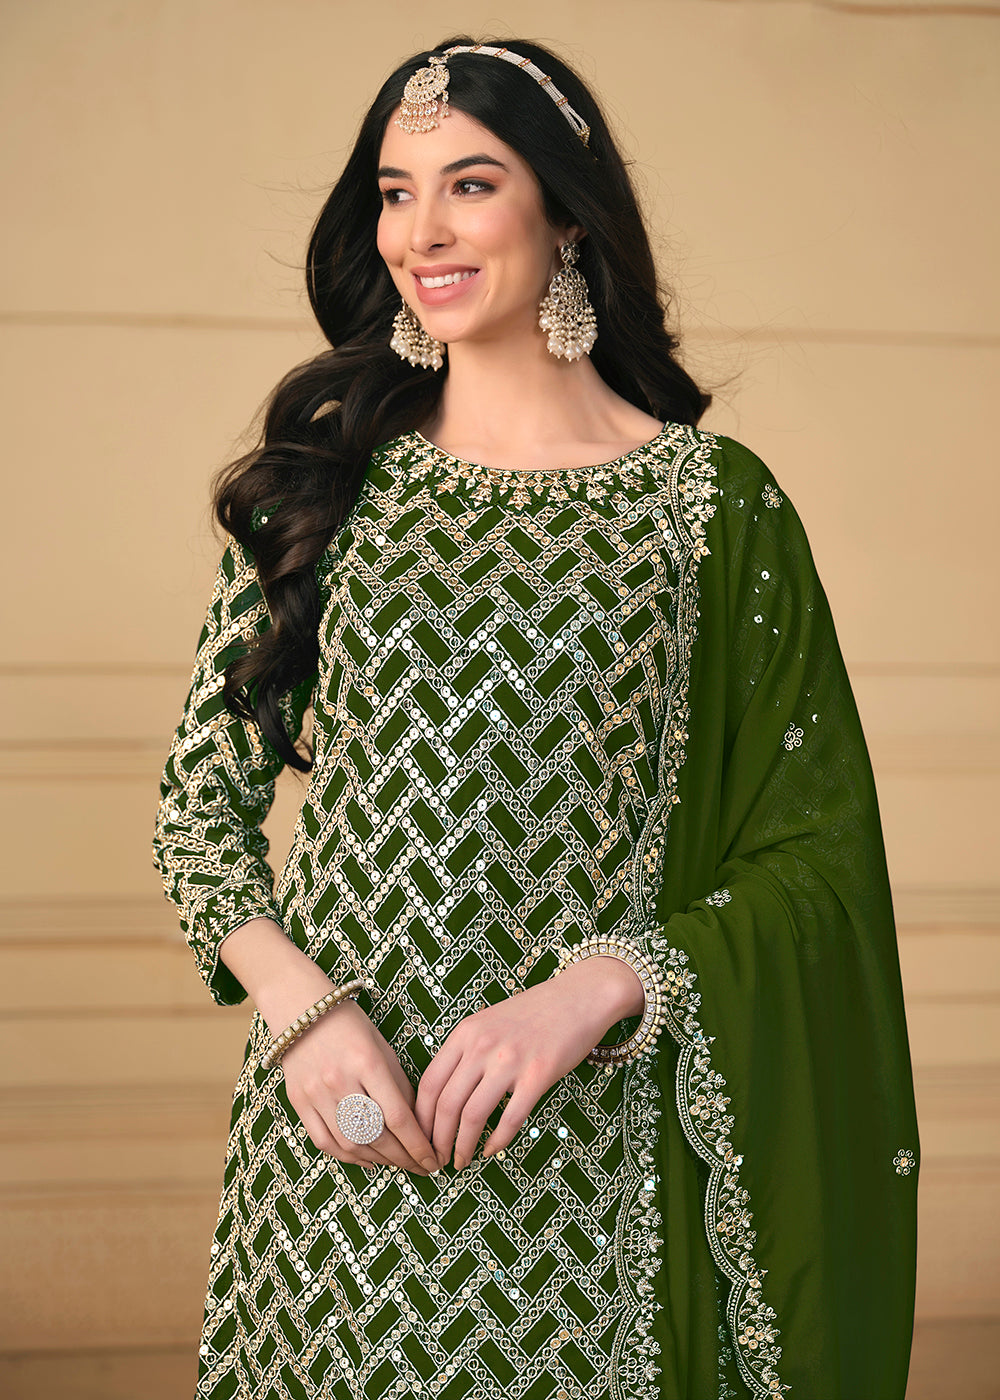 Shop Now Georgette Green Embroidered Gharara Style Suit Online at Empress Clothing in USA, UK, Canada, Italy & Worldwide.